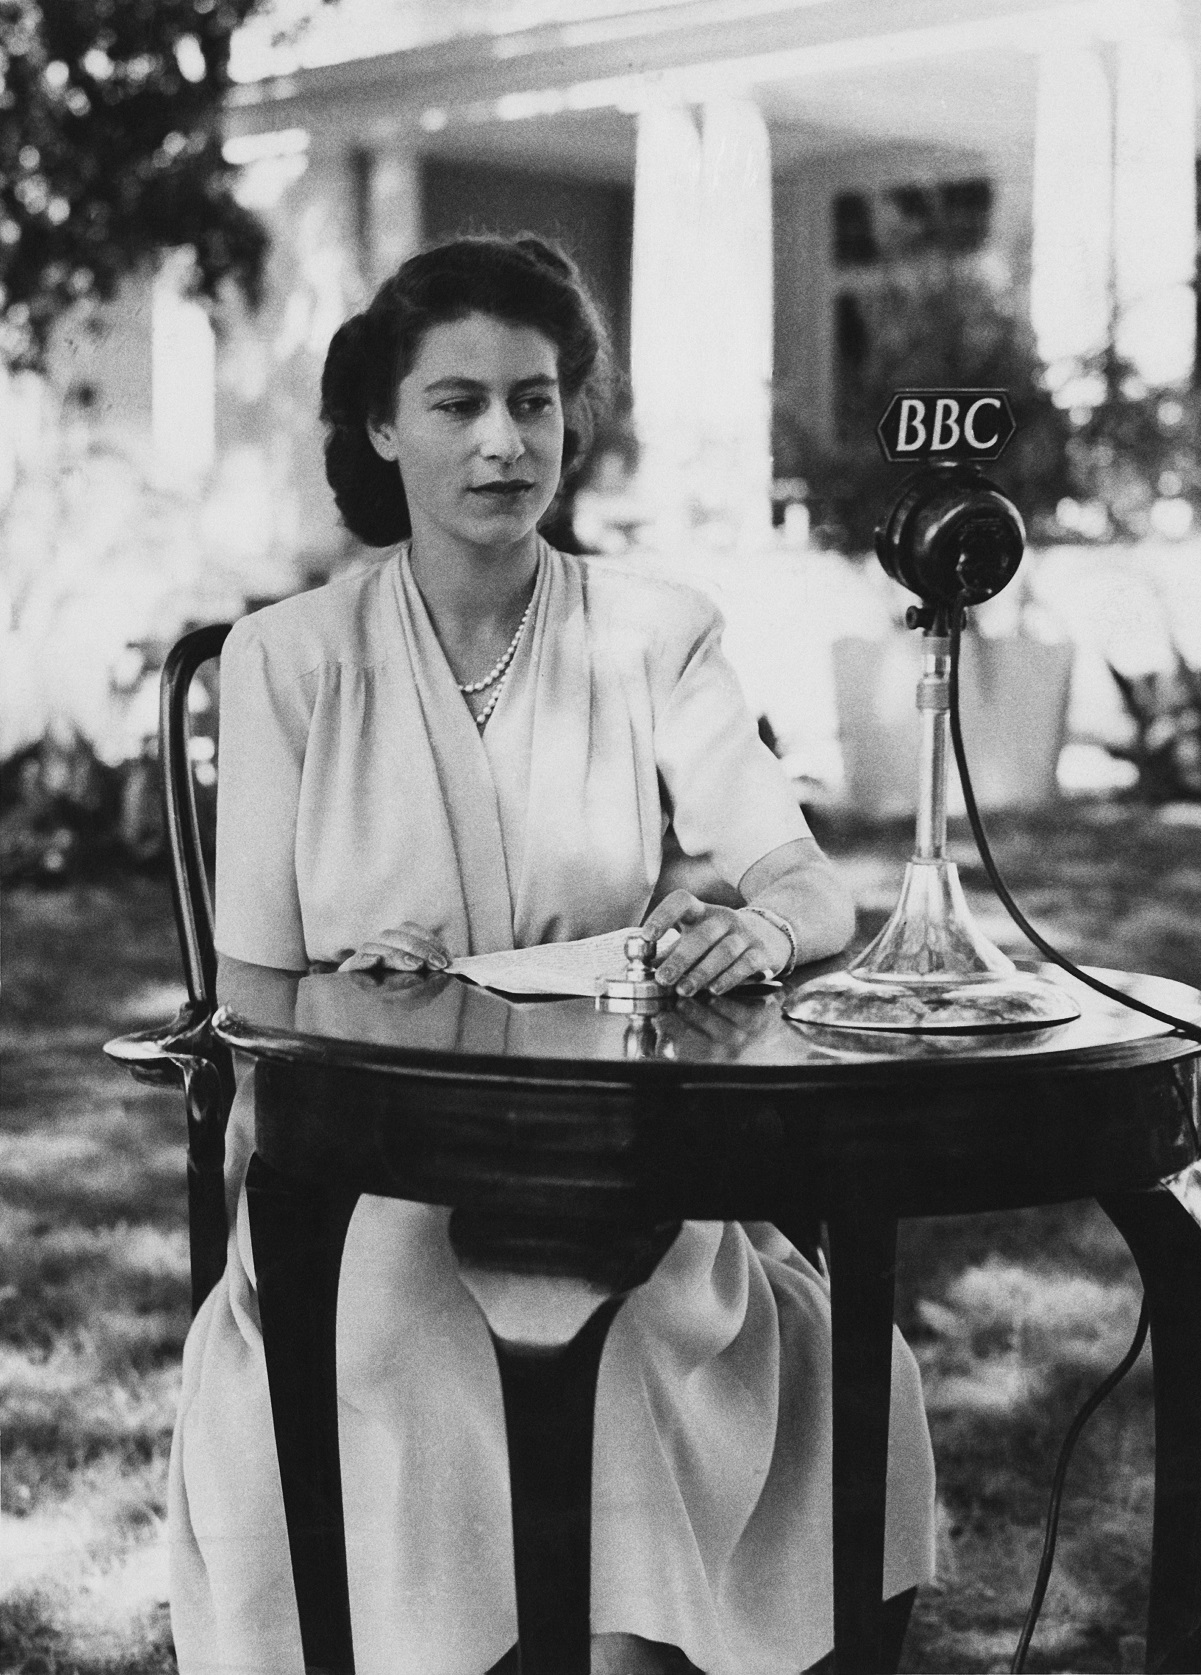 Then-Princess Elizabeth makes a broadcast from outside the Government House in Cape Town, South Africa, on her 21st birthday in 1947